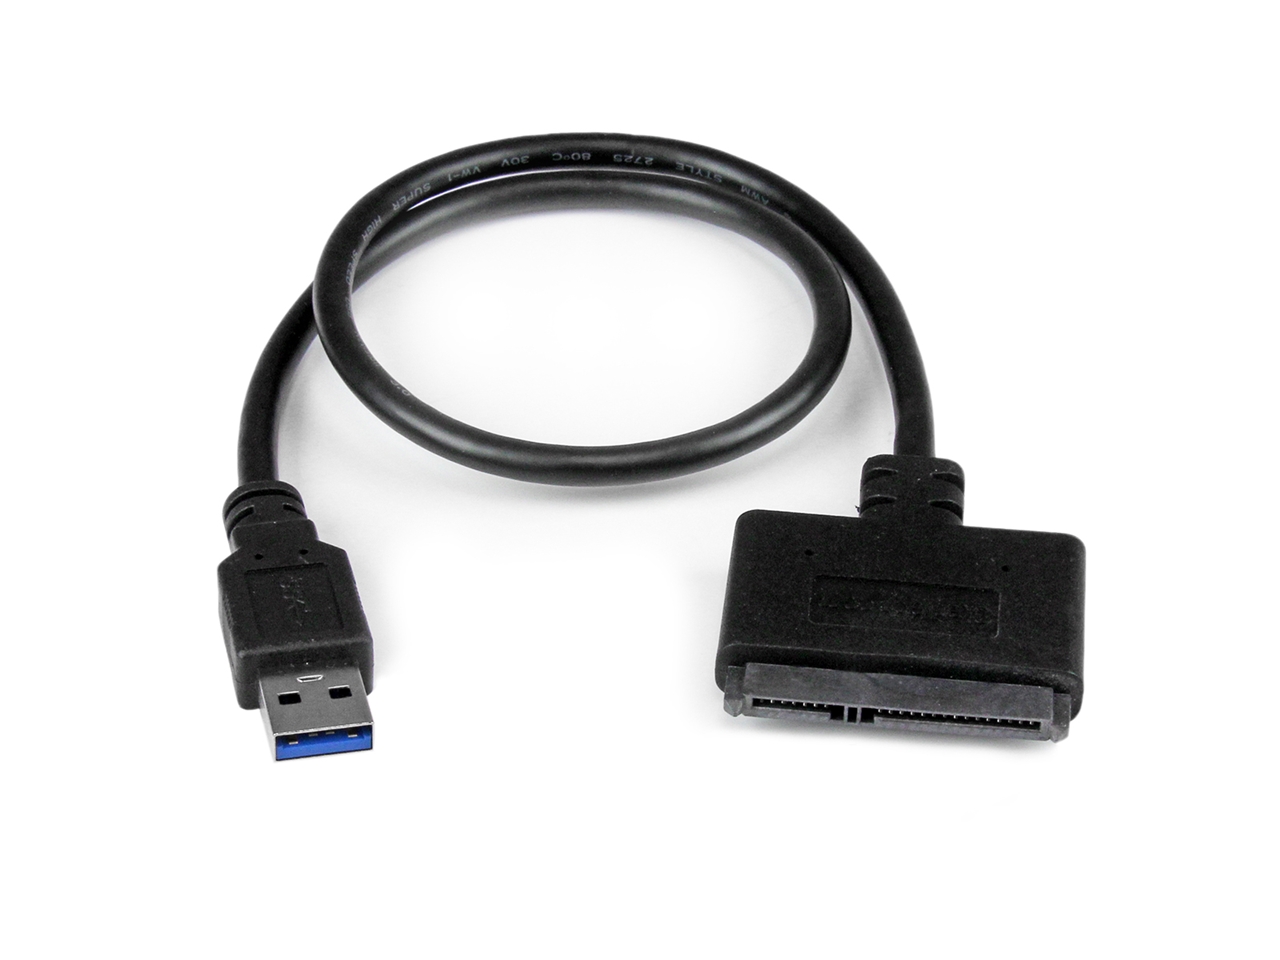 USB 3.0 To 2.5” SATA III Drive at Cables N More